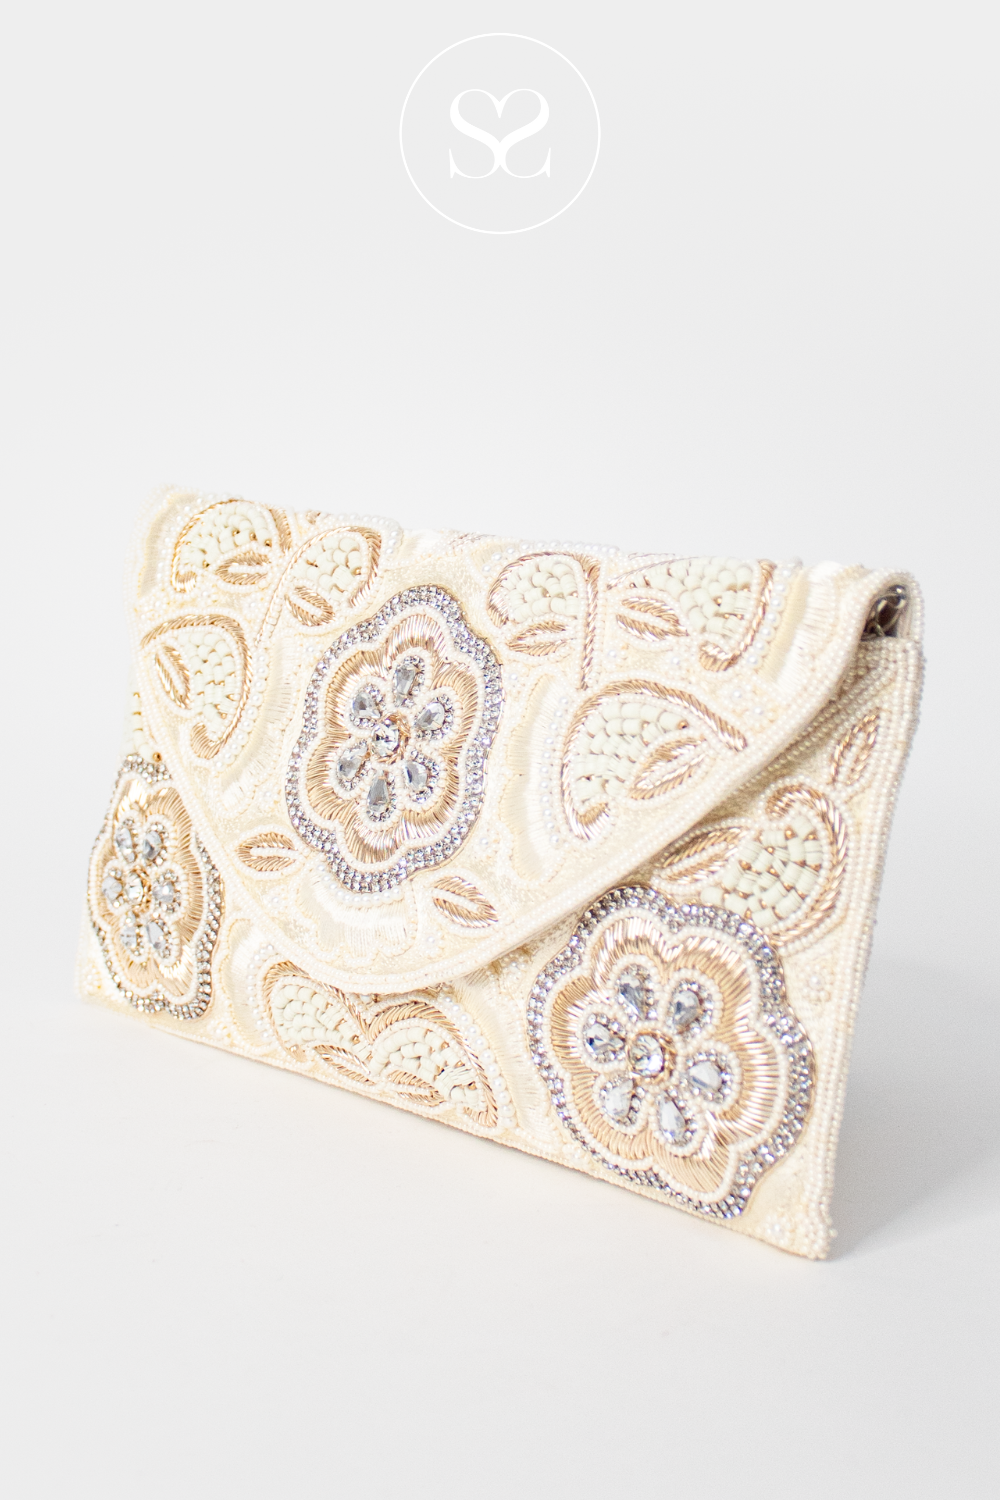 SHENEIL BEADED EMBELLISHED CREAM AND GOLD ENVELOPE OCCASSION CLUTCH BAG